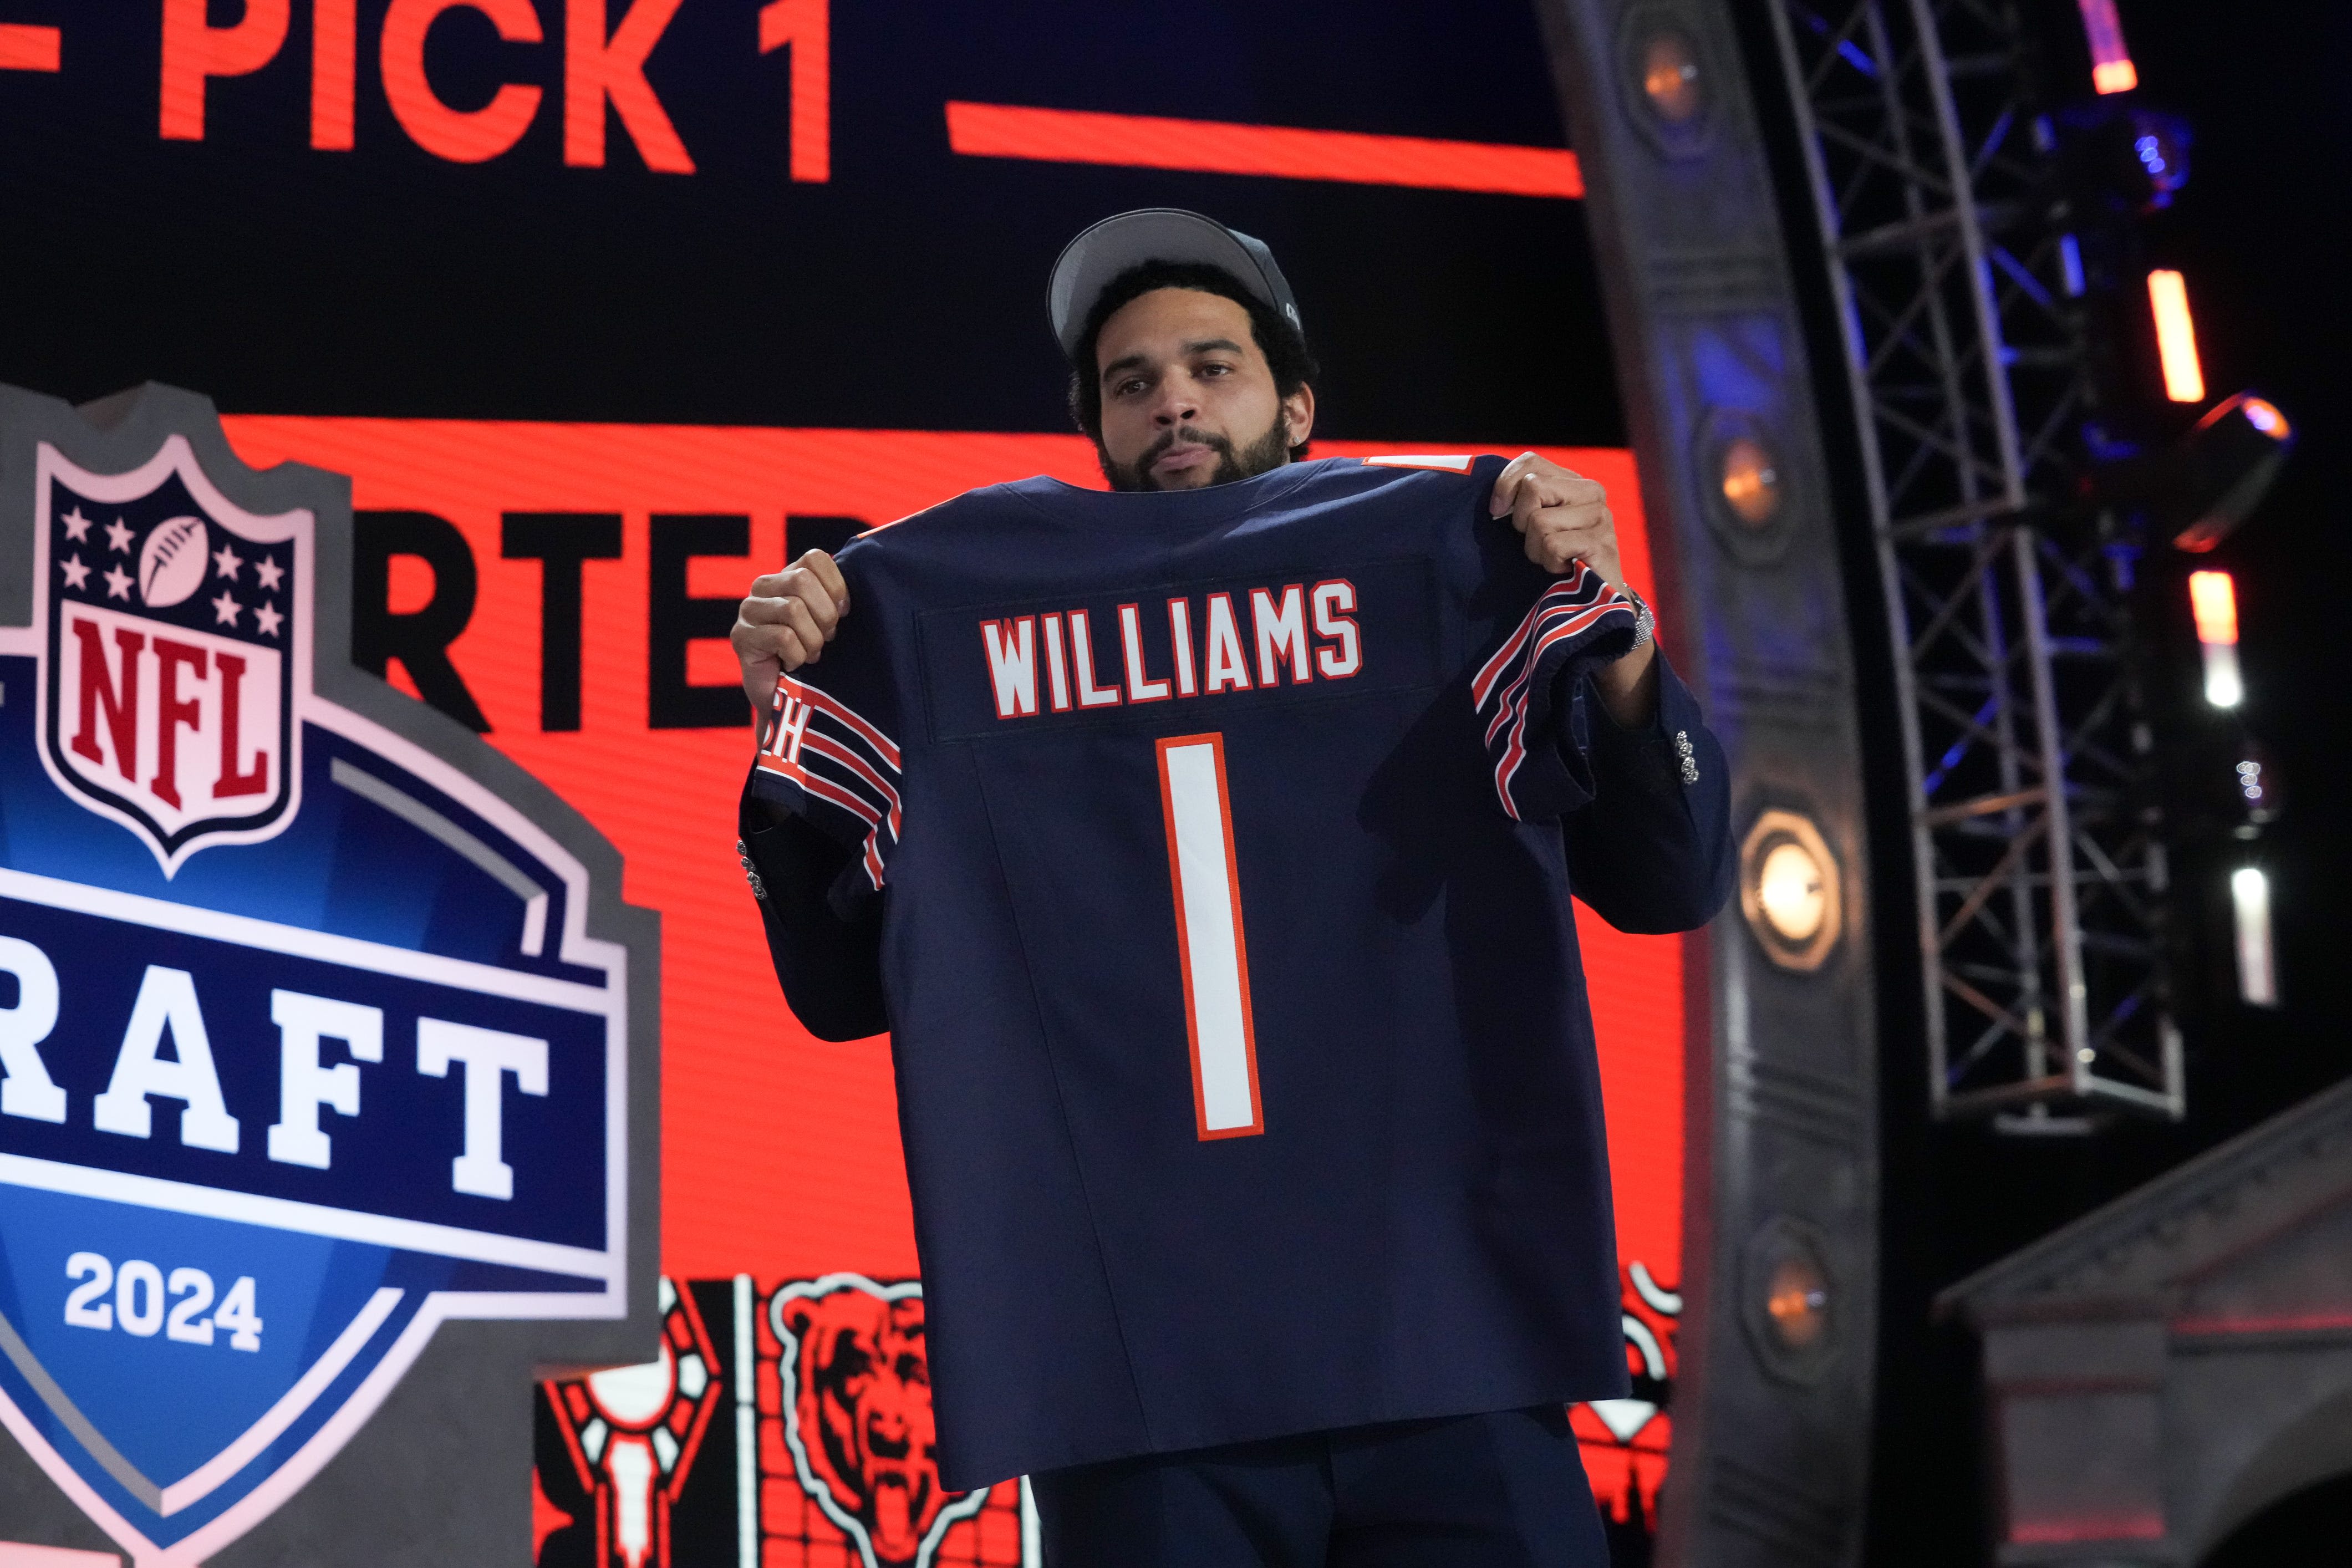 Caleb Williams' NFL contract details: How much will NFL draft's No. 1 pick earn?